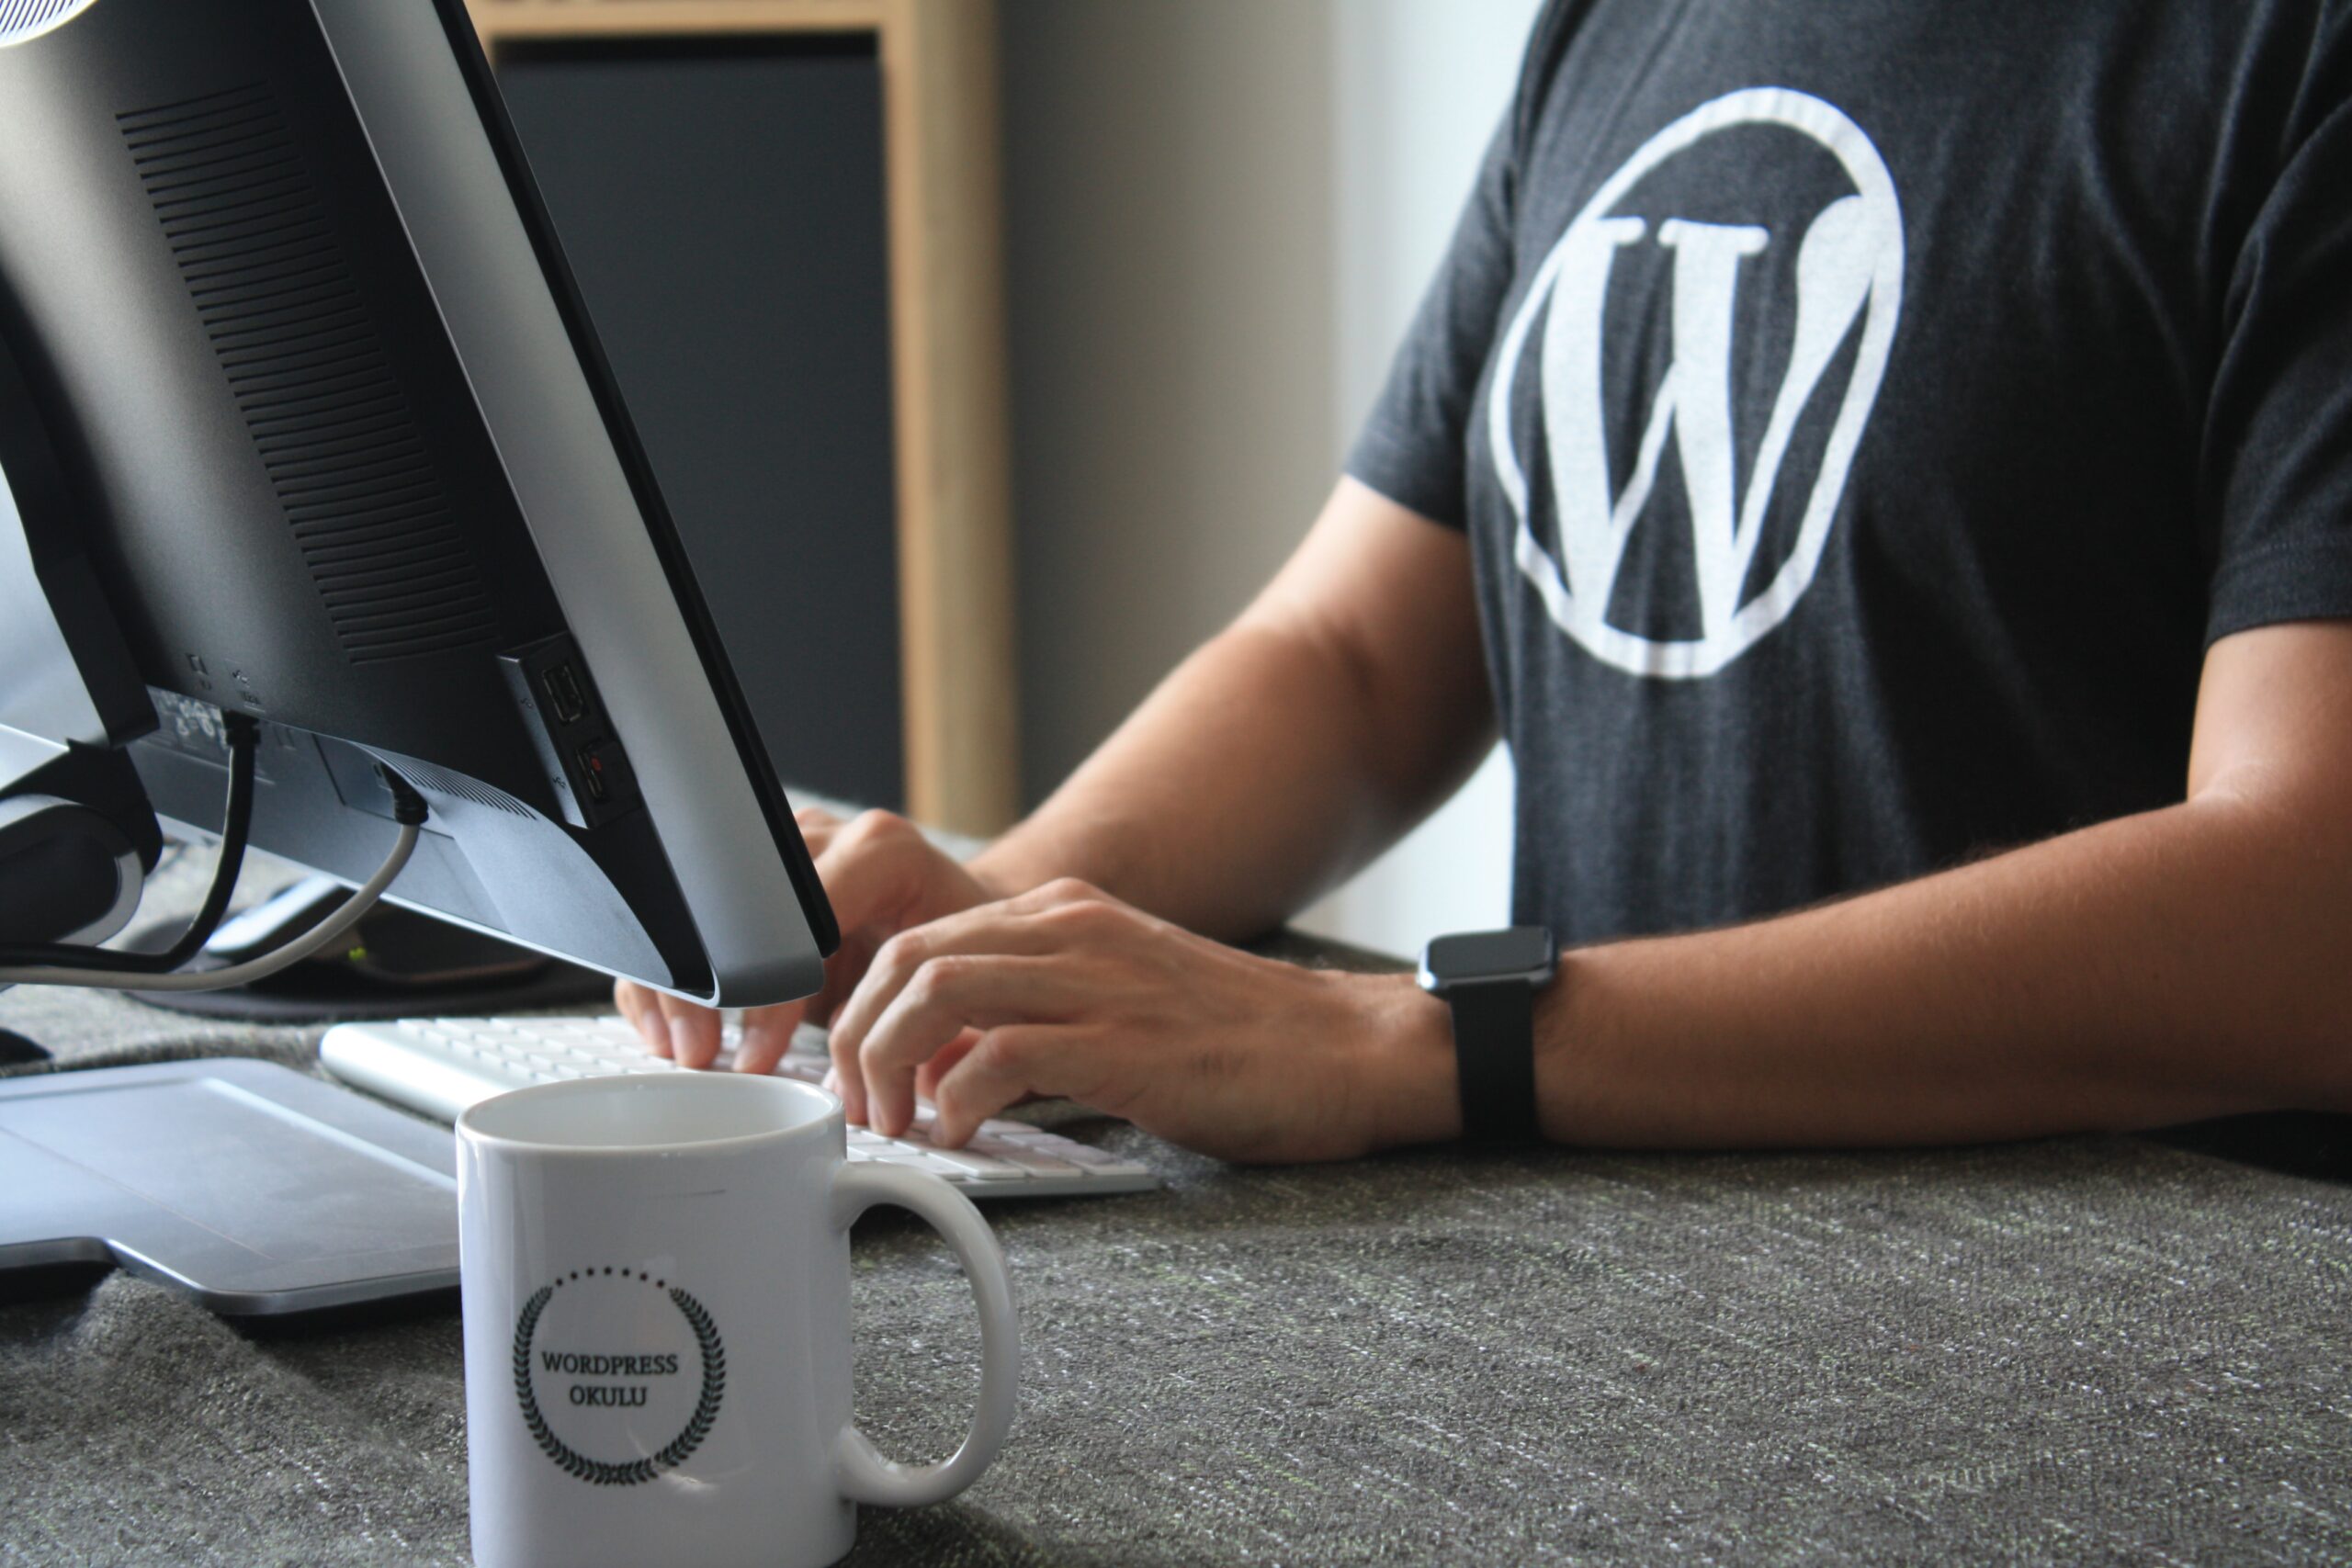 The Advantages of Using WordPress